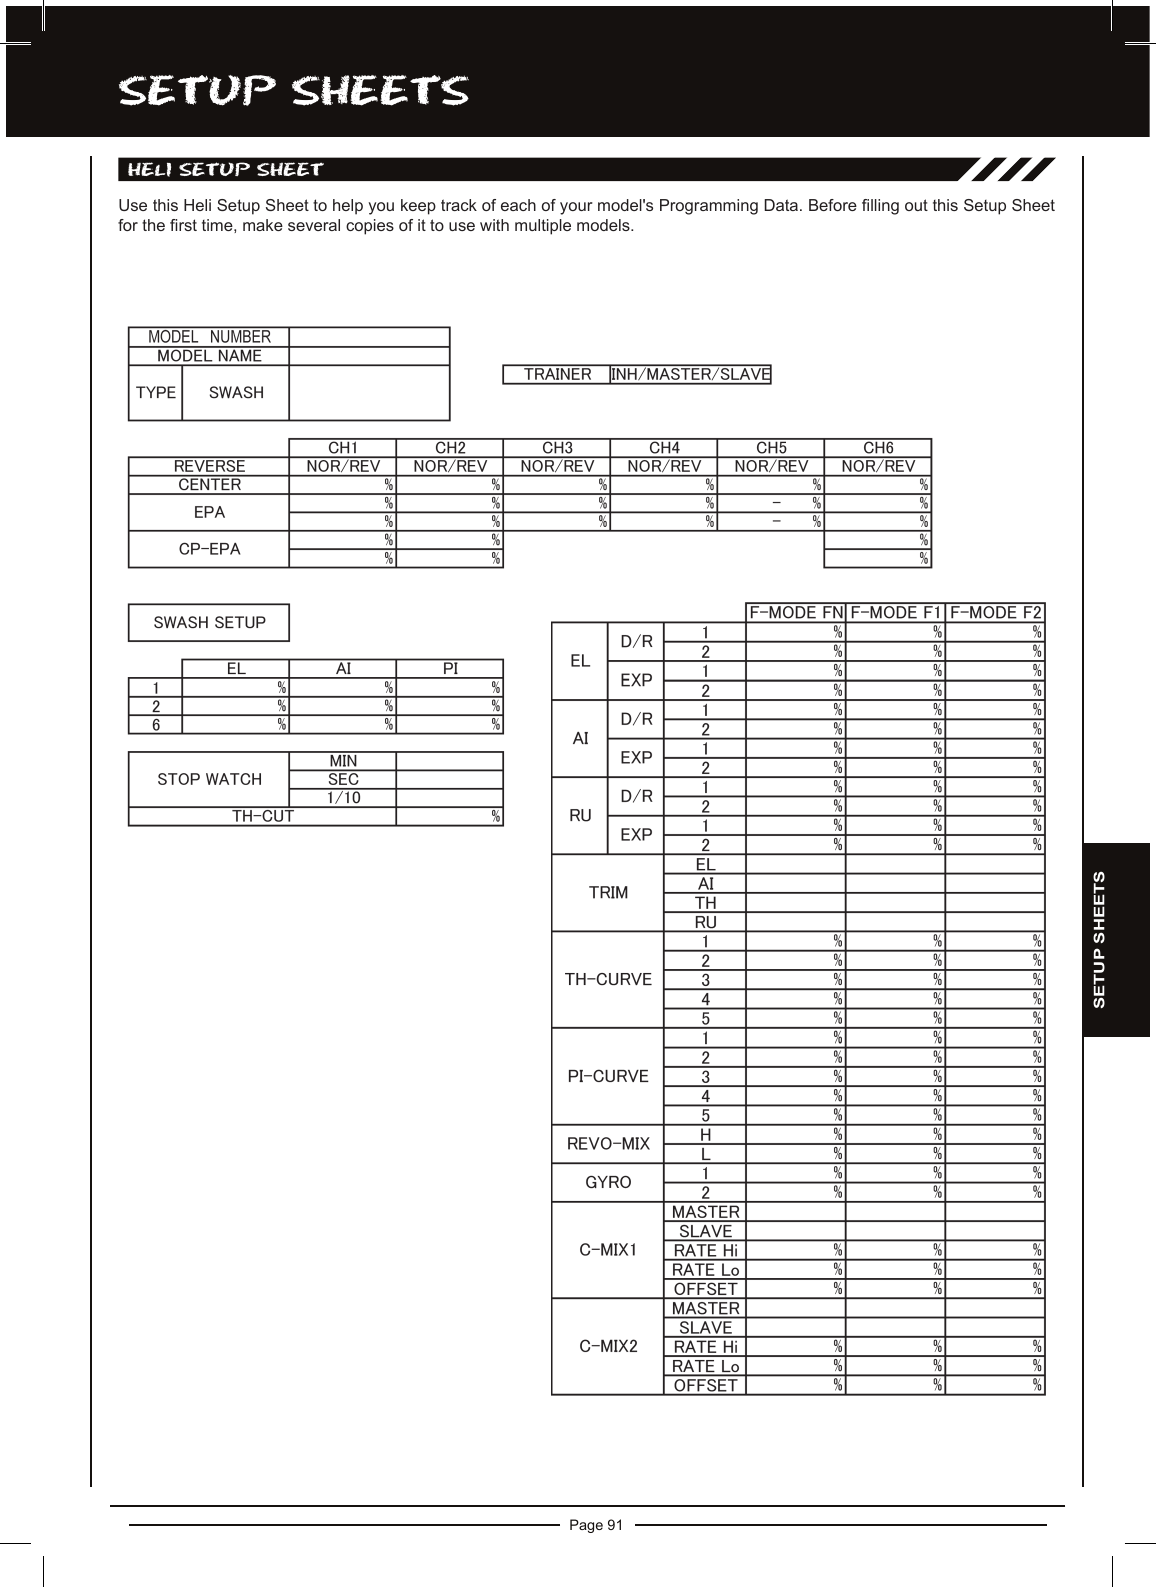 Page 91SETUP ShEETSSETUP SHEETShELi SETUP ShEETUse this Heli Setup Sheet to help you keep track of each of your model&apos;s Programming Data. Before lling out this Setup Sheet for the rst time, make several copies of it to use with multiple models.